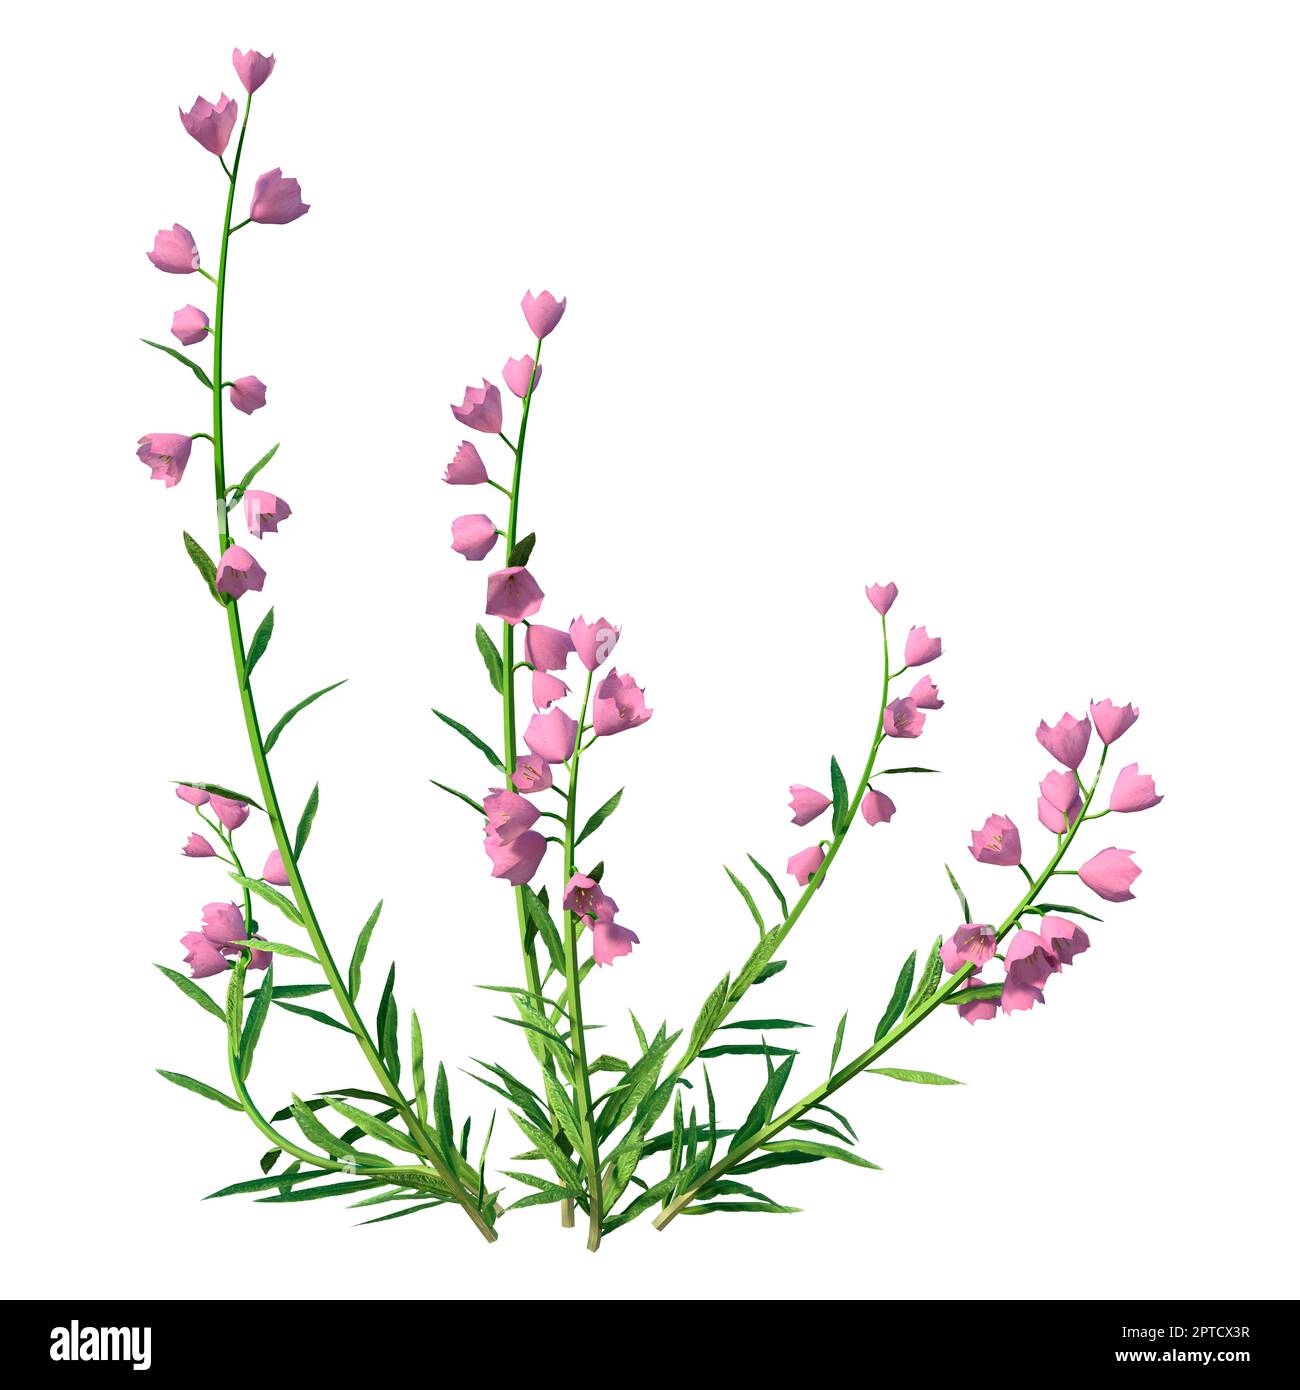 3D rendering of pink canterbury bells isolated on white background Stock Photo